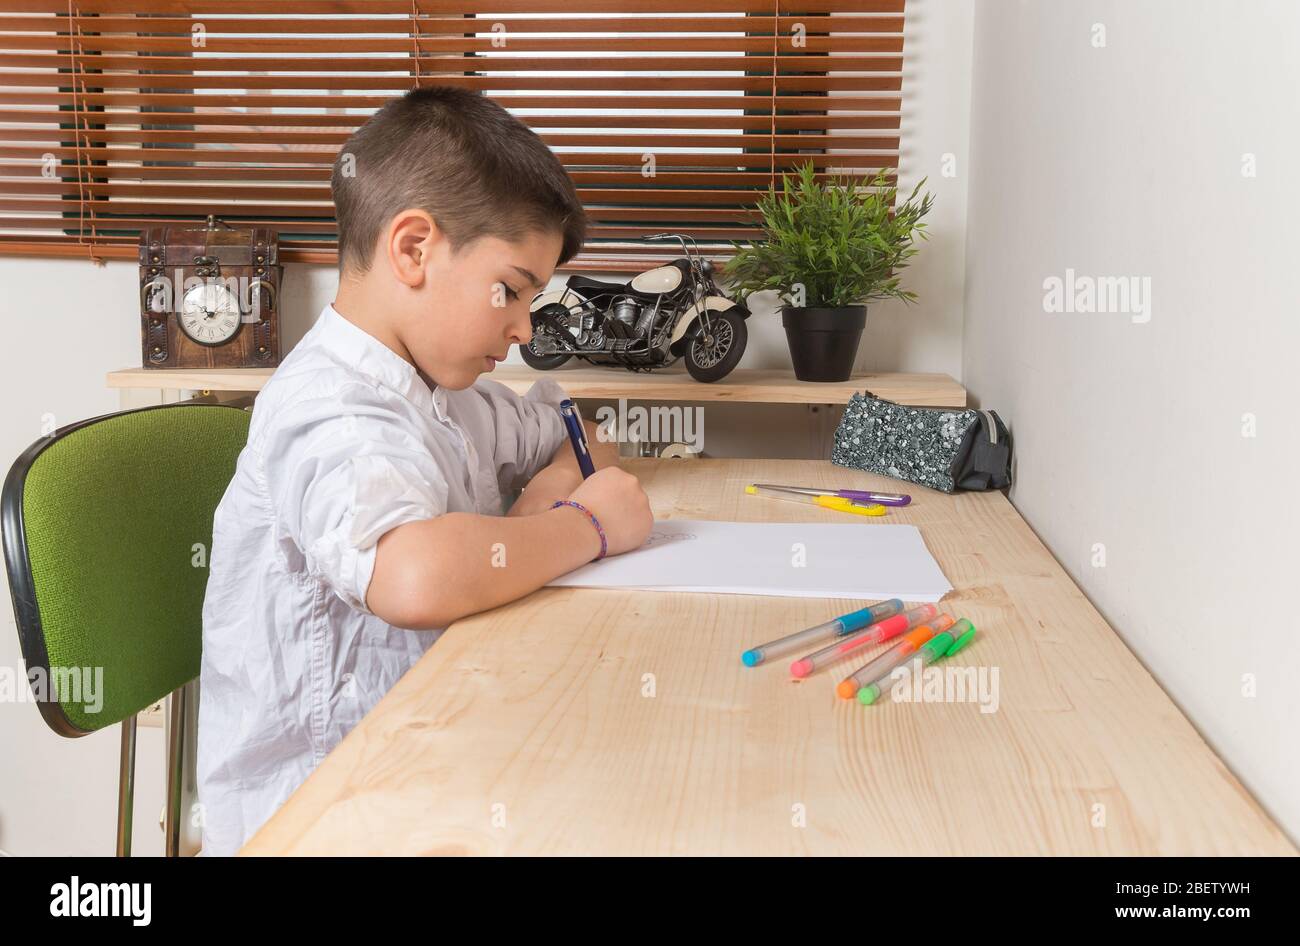 https://c8.alamy.com/comp/2BETYWH/young-8-year-old-boy-writing-and-drawing-on-paper-inside-home-2BETYWH.jpg